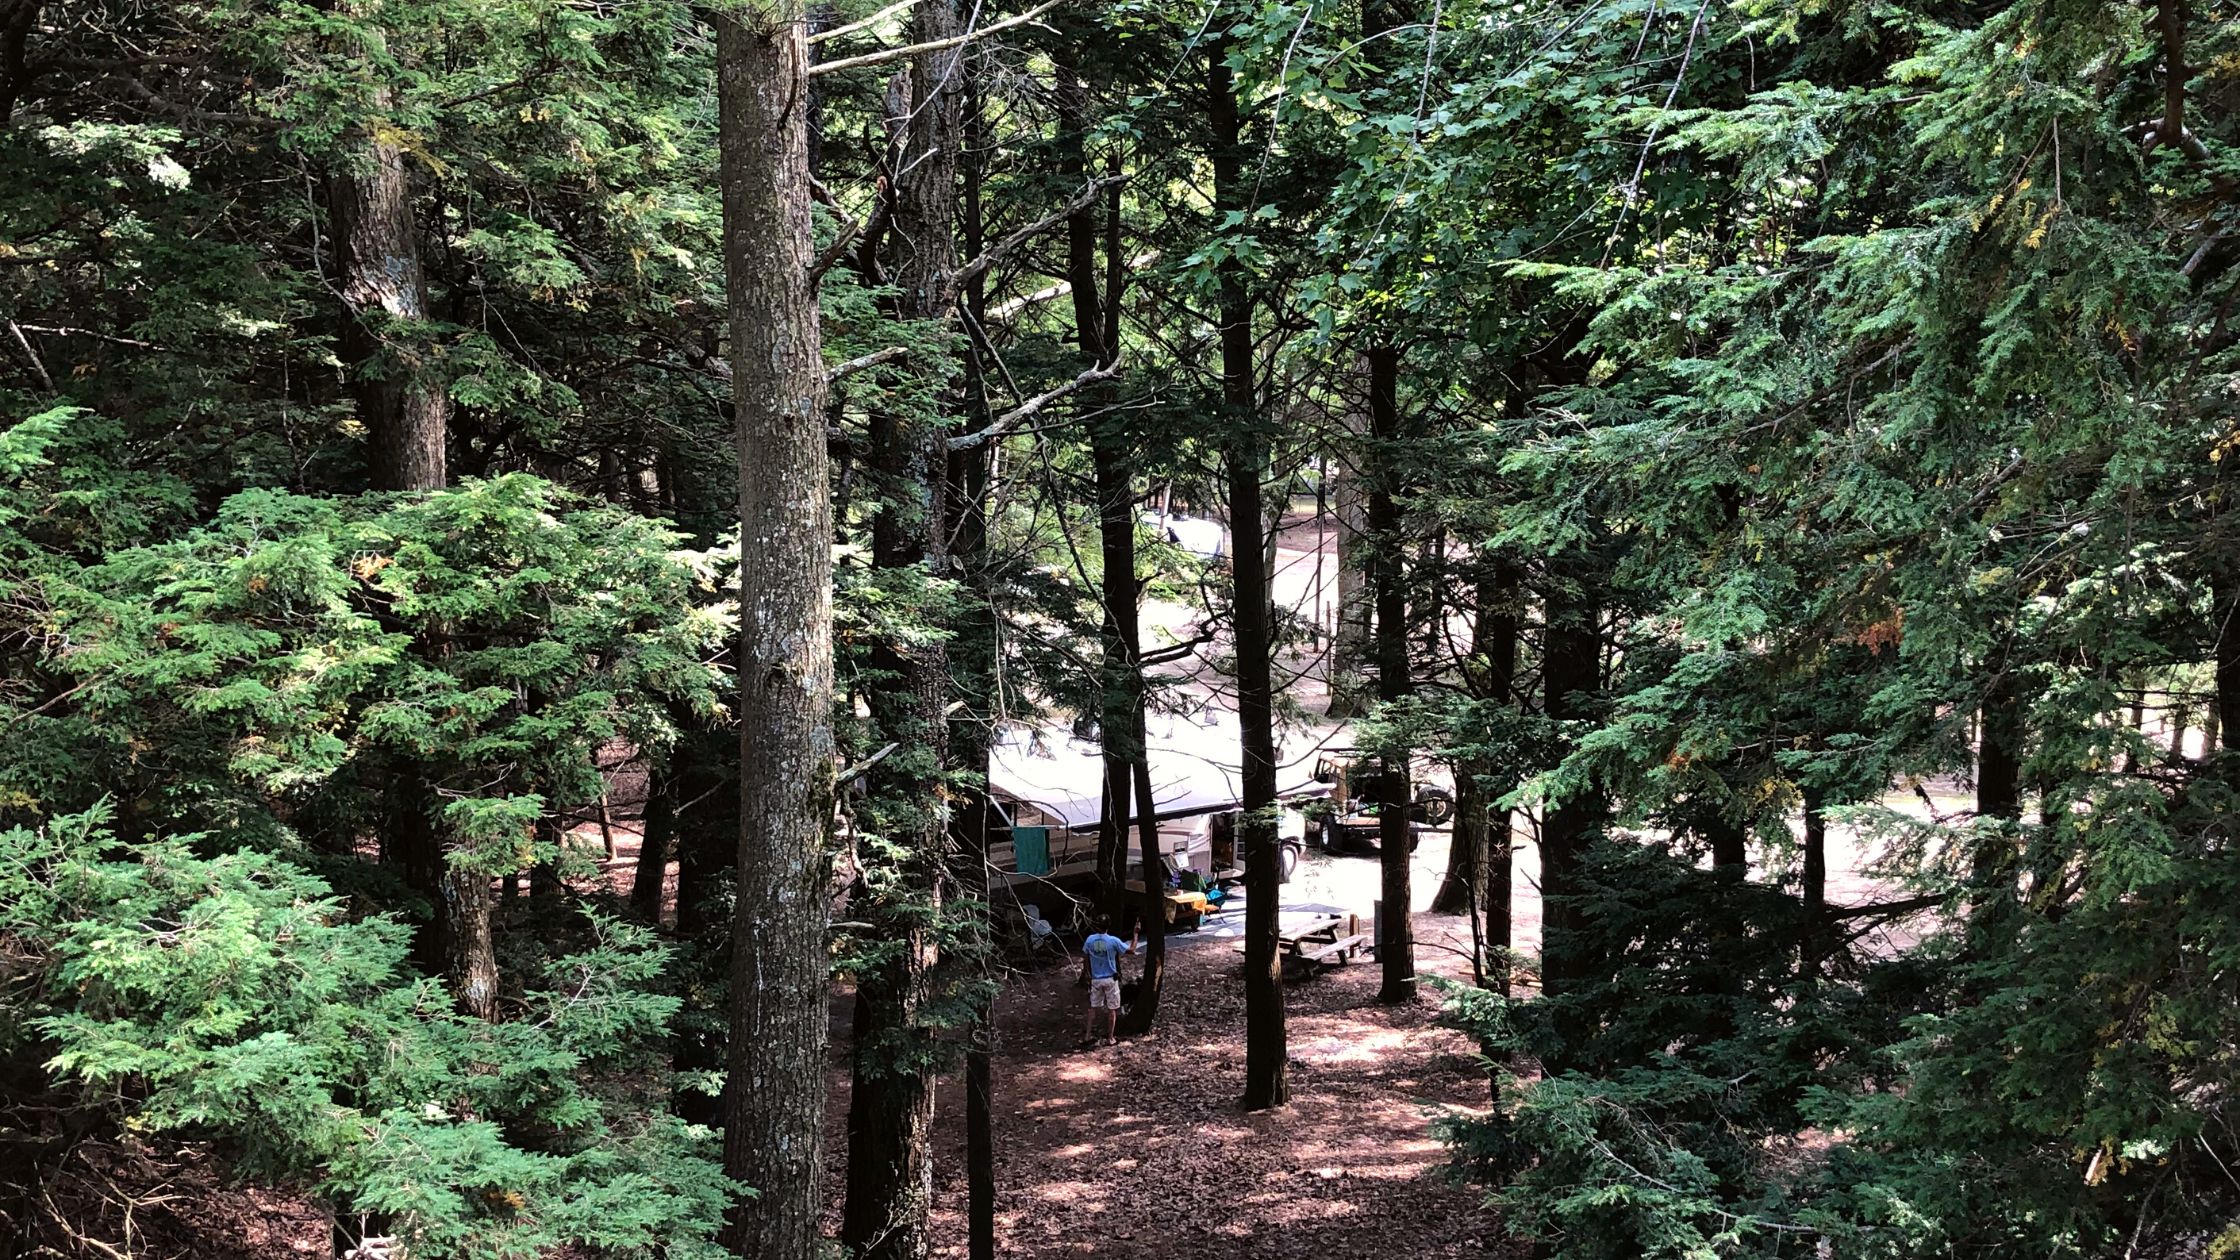 looking through the pine trees at a camping trailer